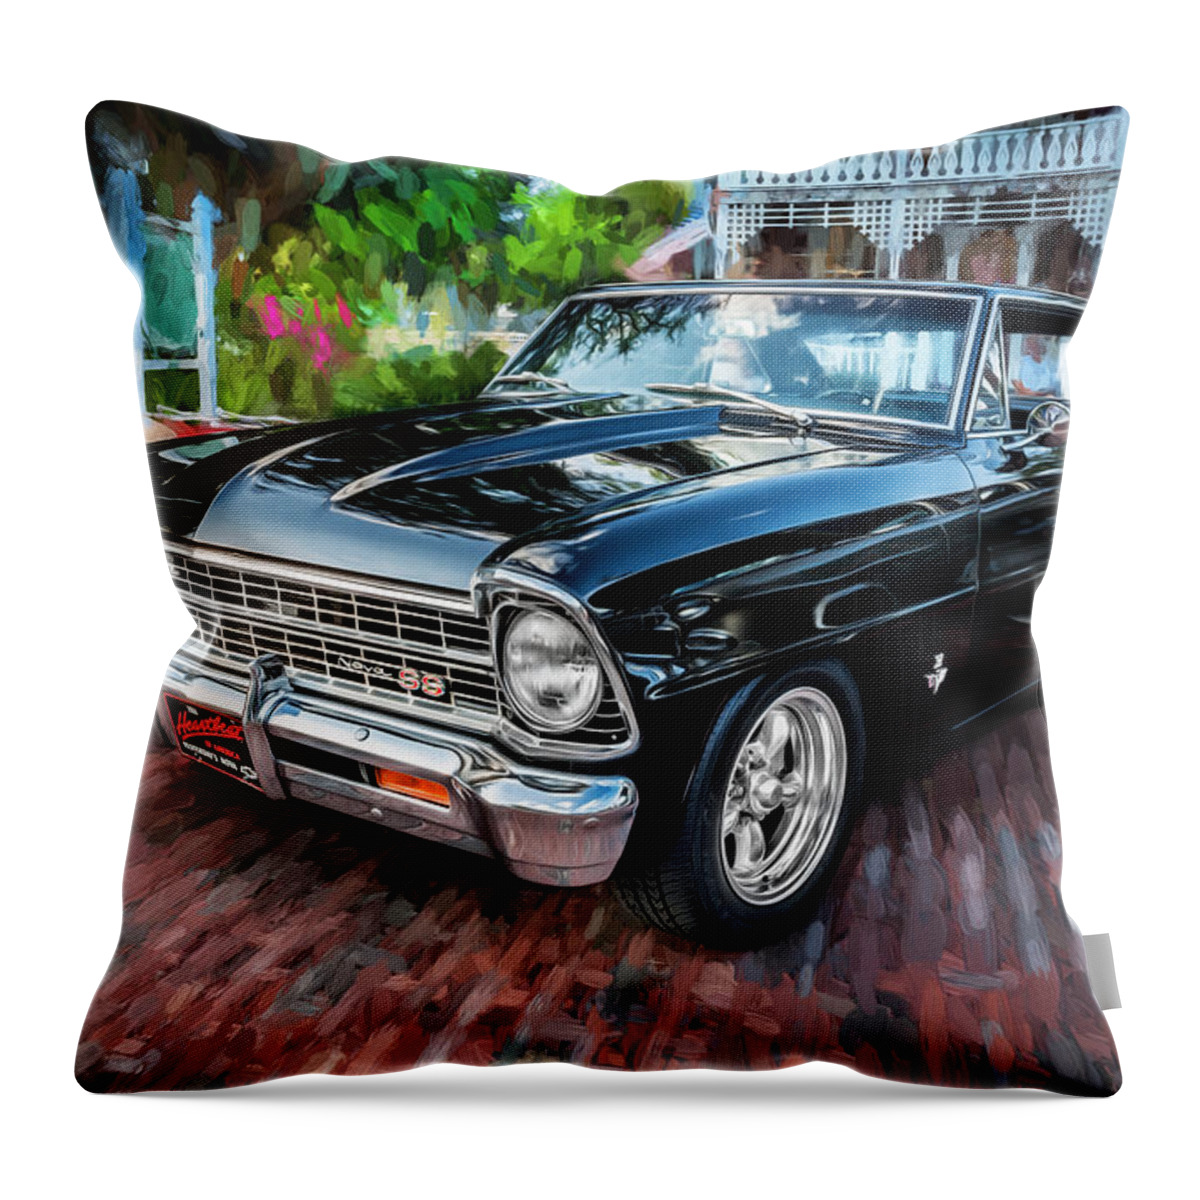 1967 Chevrolet Throw Pillow featuring the photograph 1967 Chevrolet Nova Super Sport Painted BW 4 by Rich Franco